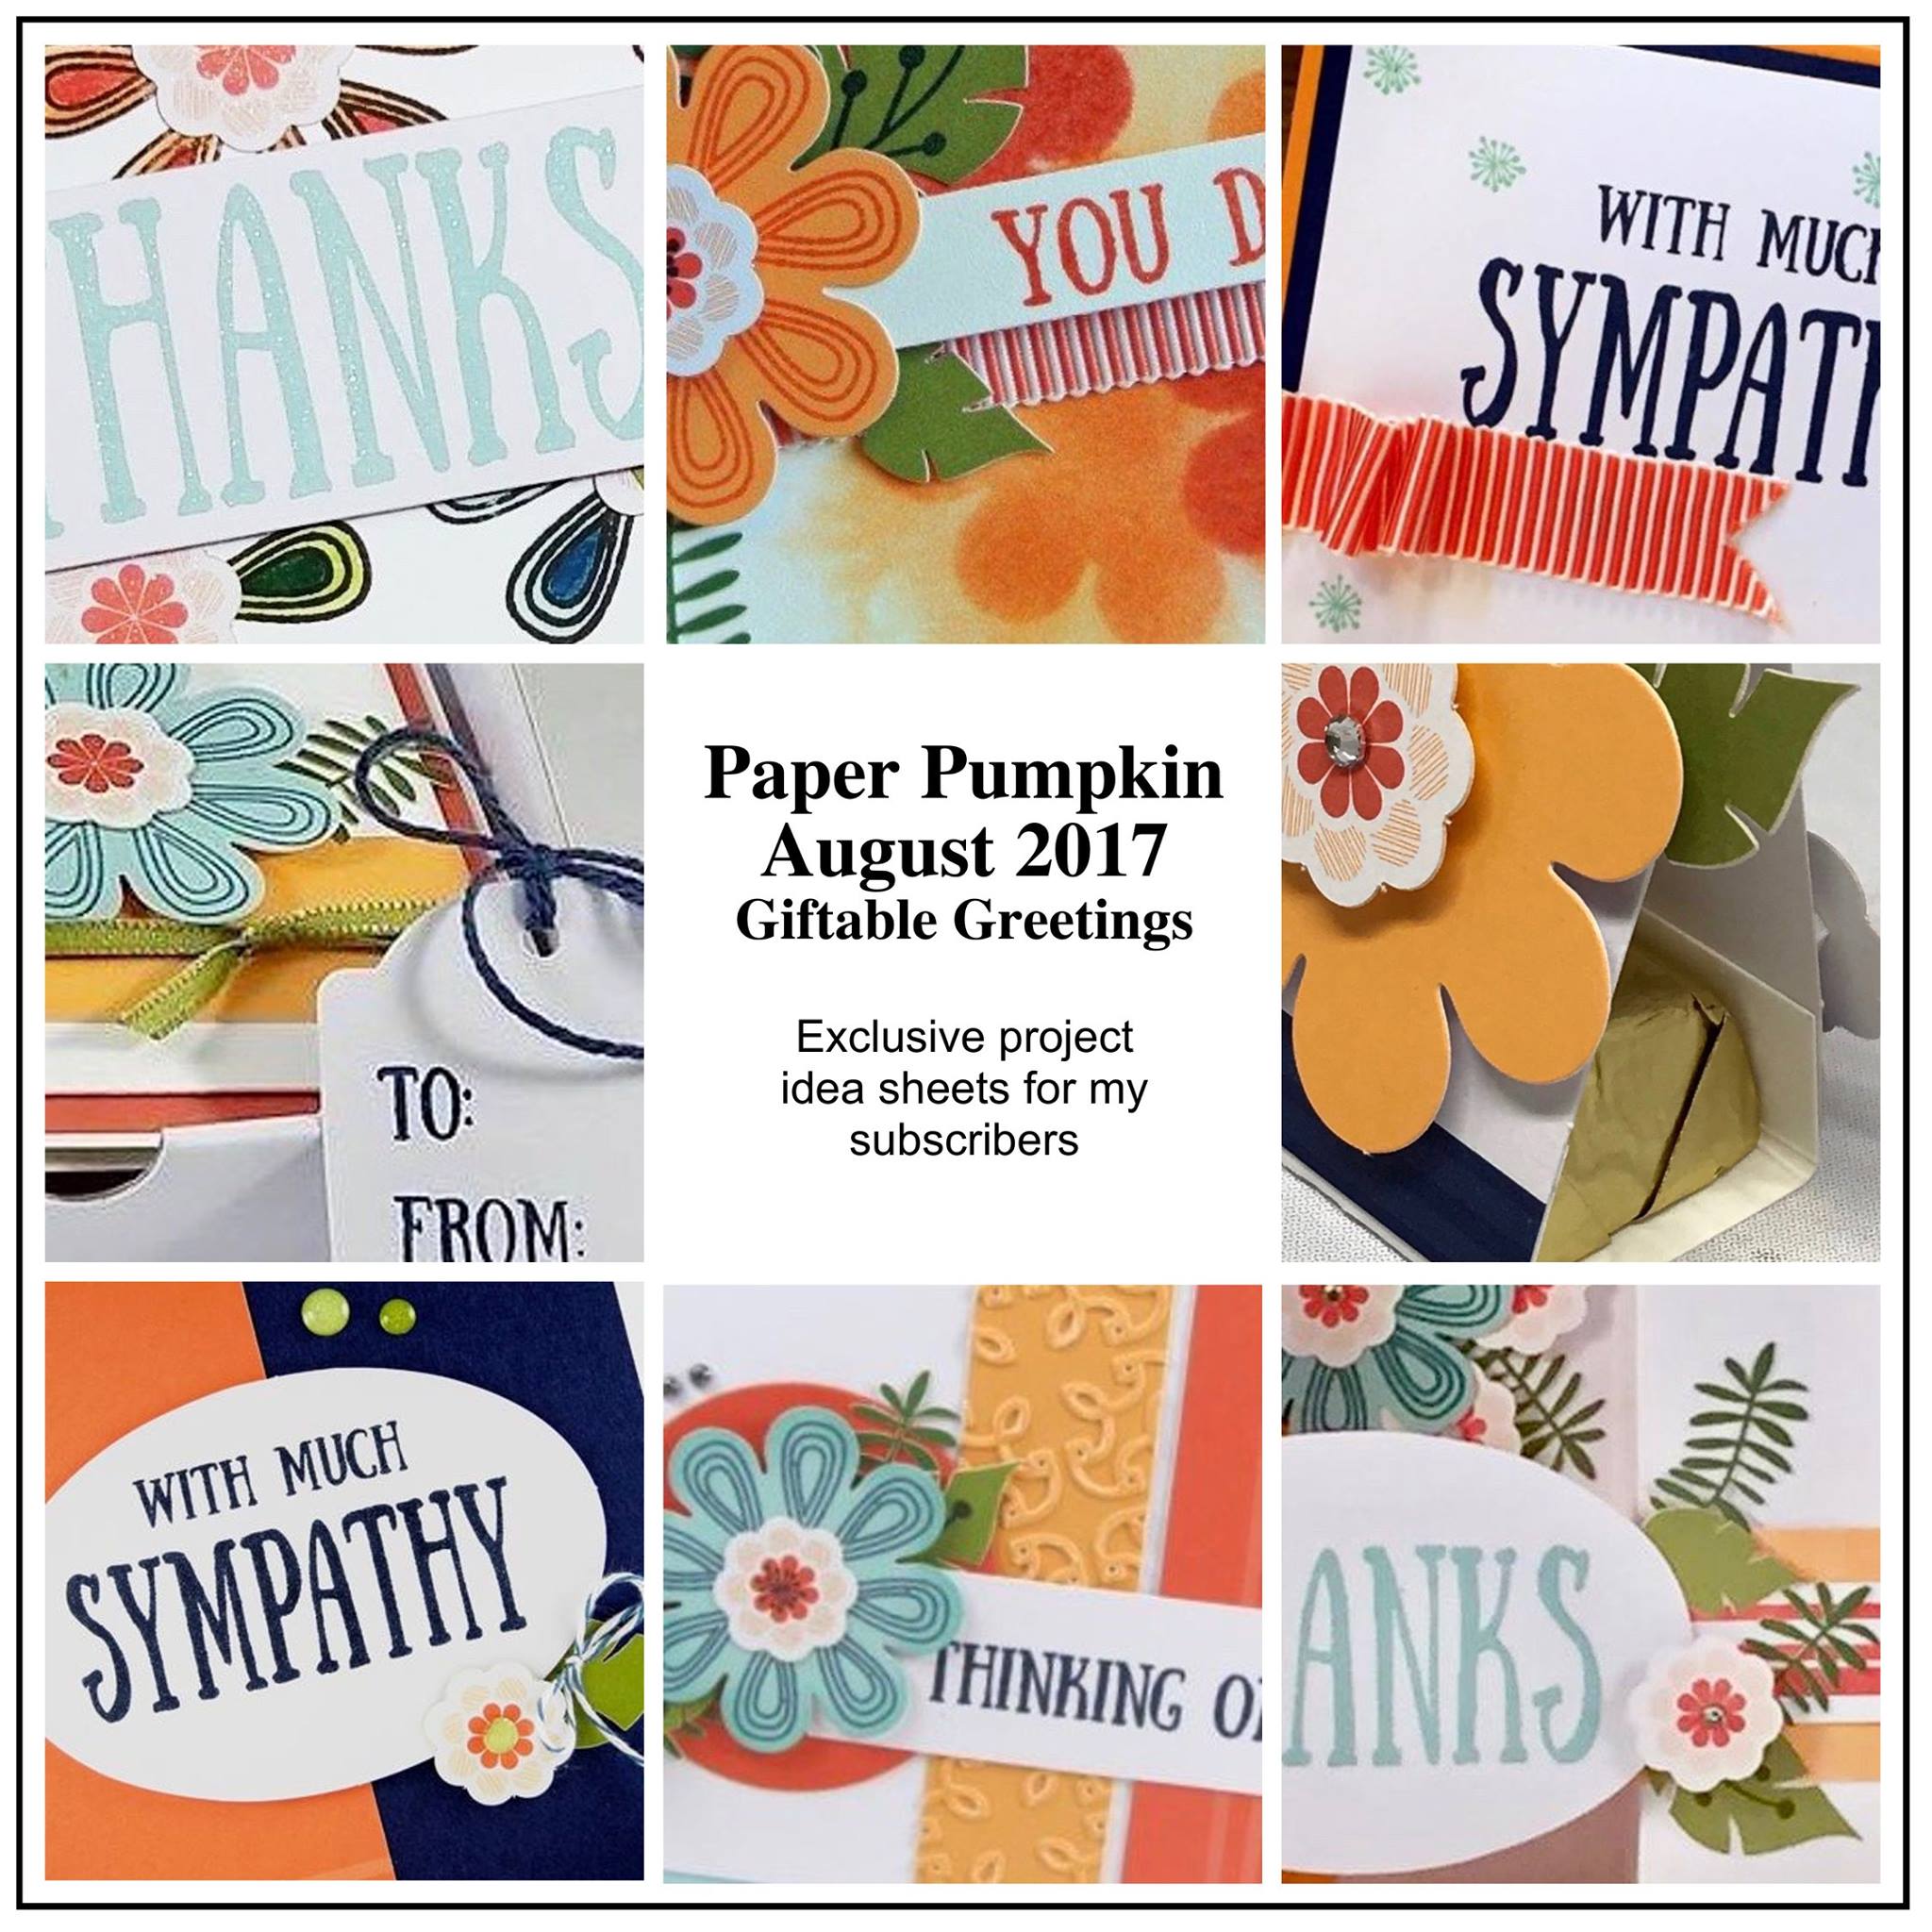 August 2017 Giftable Greetings Paper Pumpkin Kit by wendy lee, stampin up, handmade cards, rubber stamps, stamping, kit, subscription